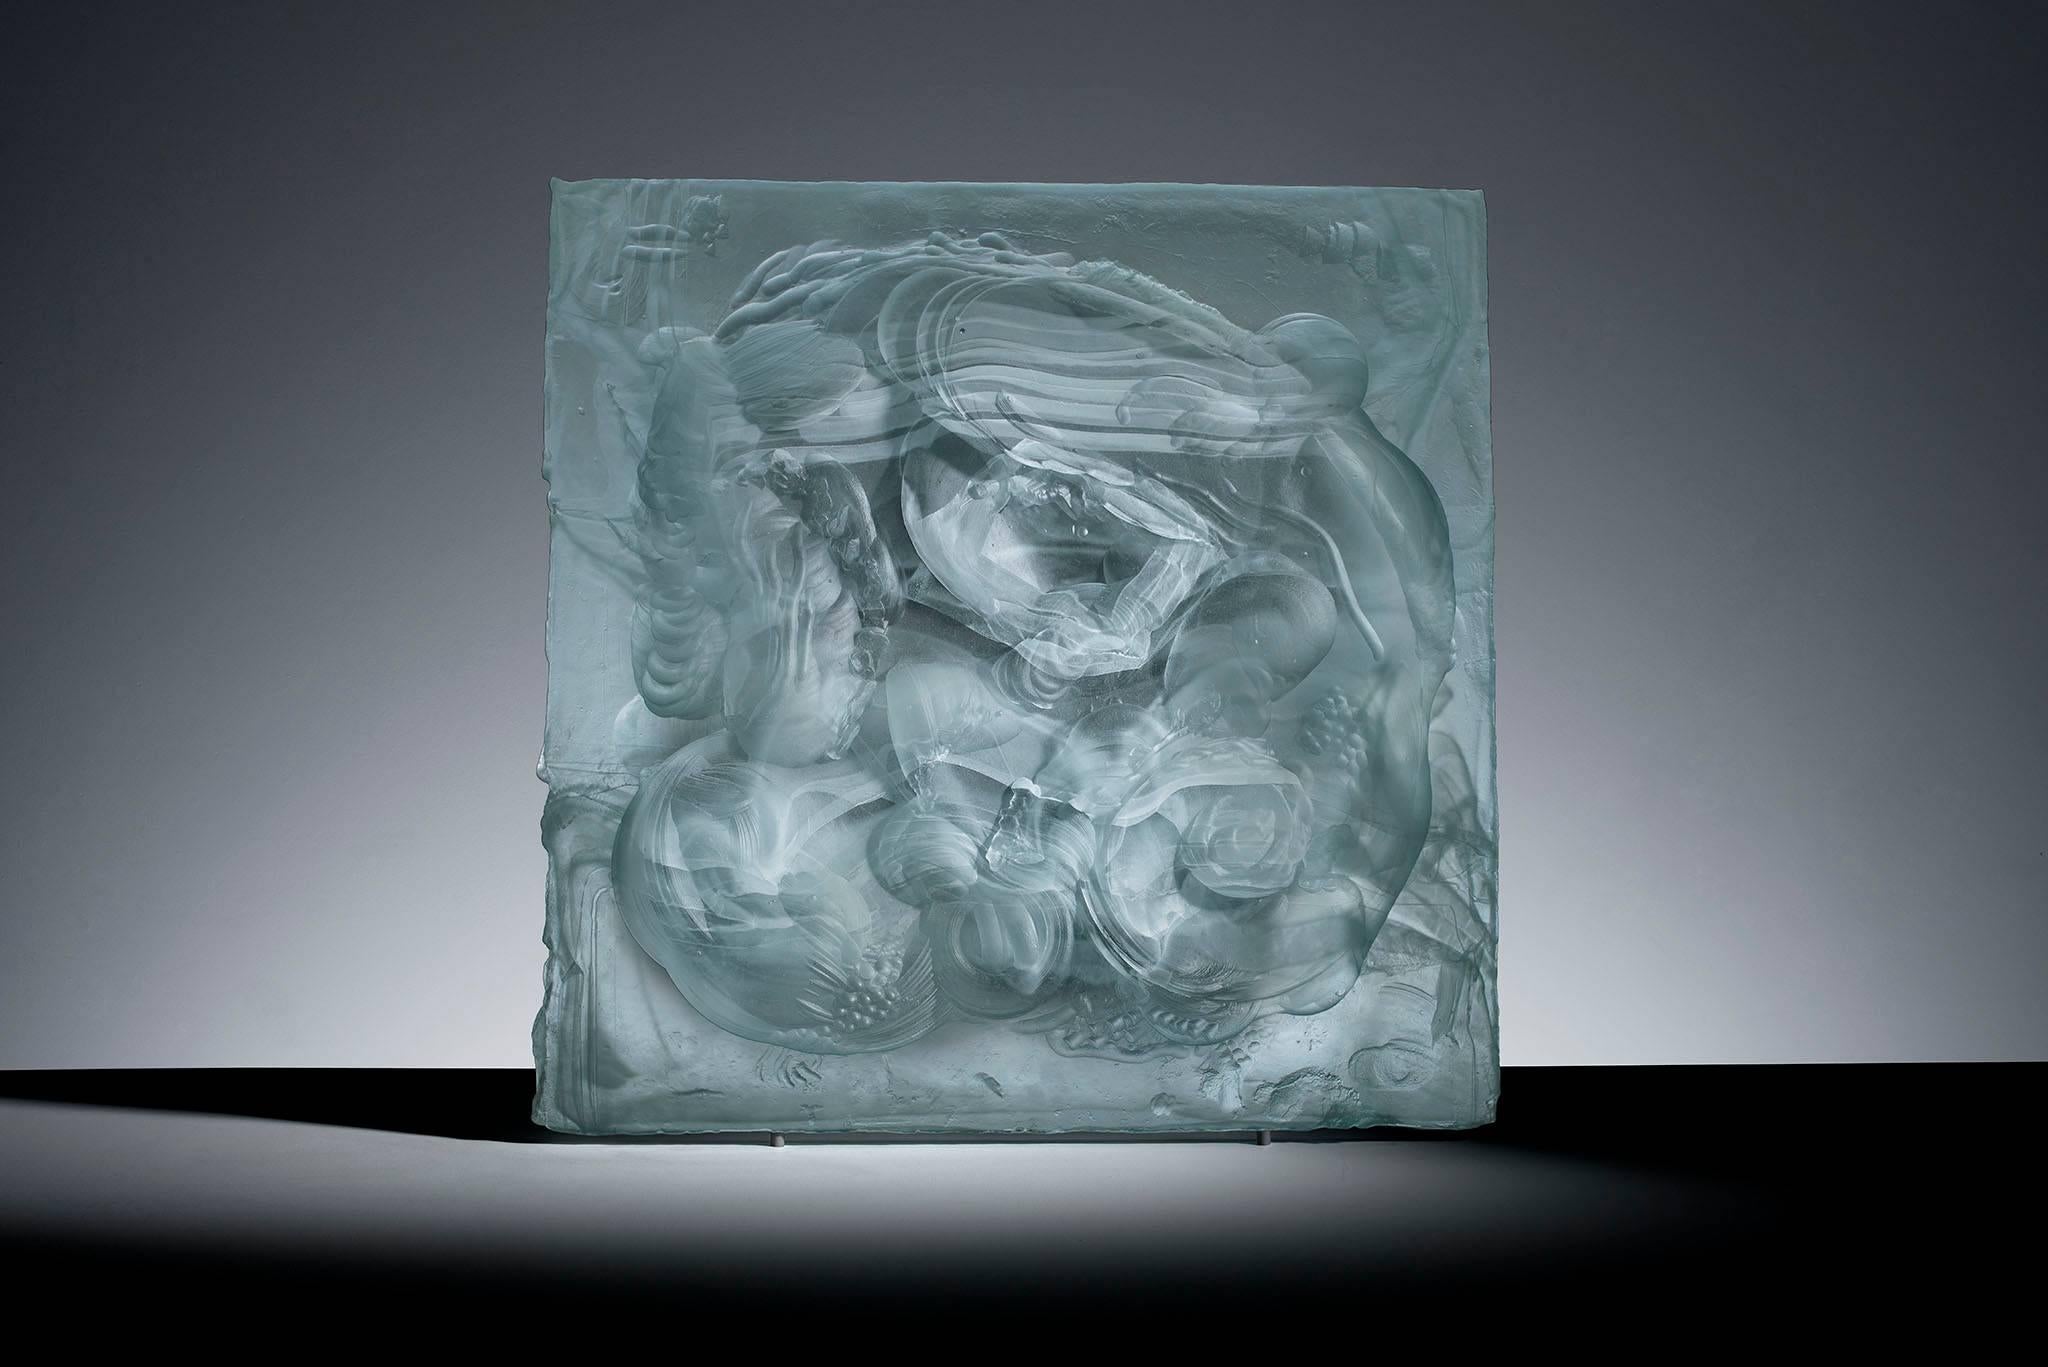 Carved Cast 1 unique cast glass relief sculpture

This relief cast artwork is formed by melting low iron glass into a hand drawn plaster mould. Danny Lane has been developing this technique over the past couple of years. The glass is transformed